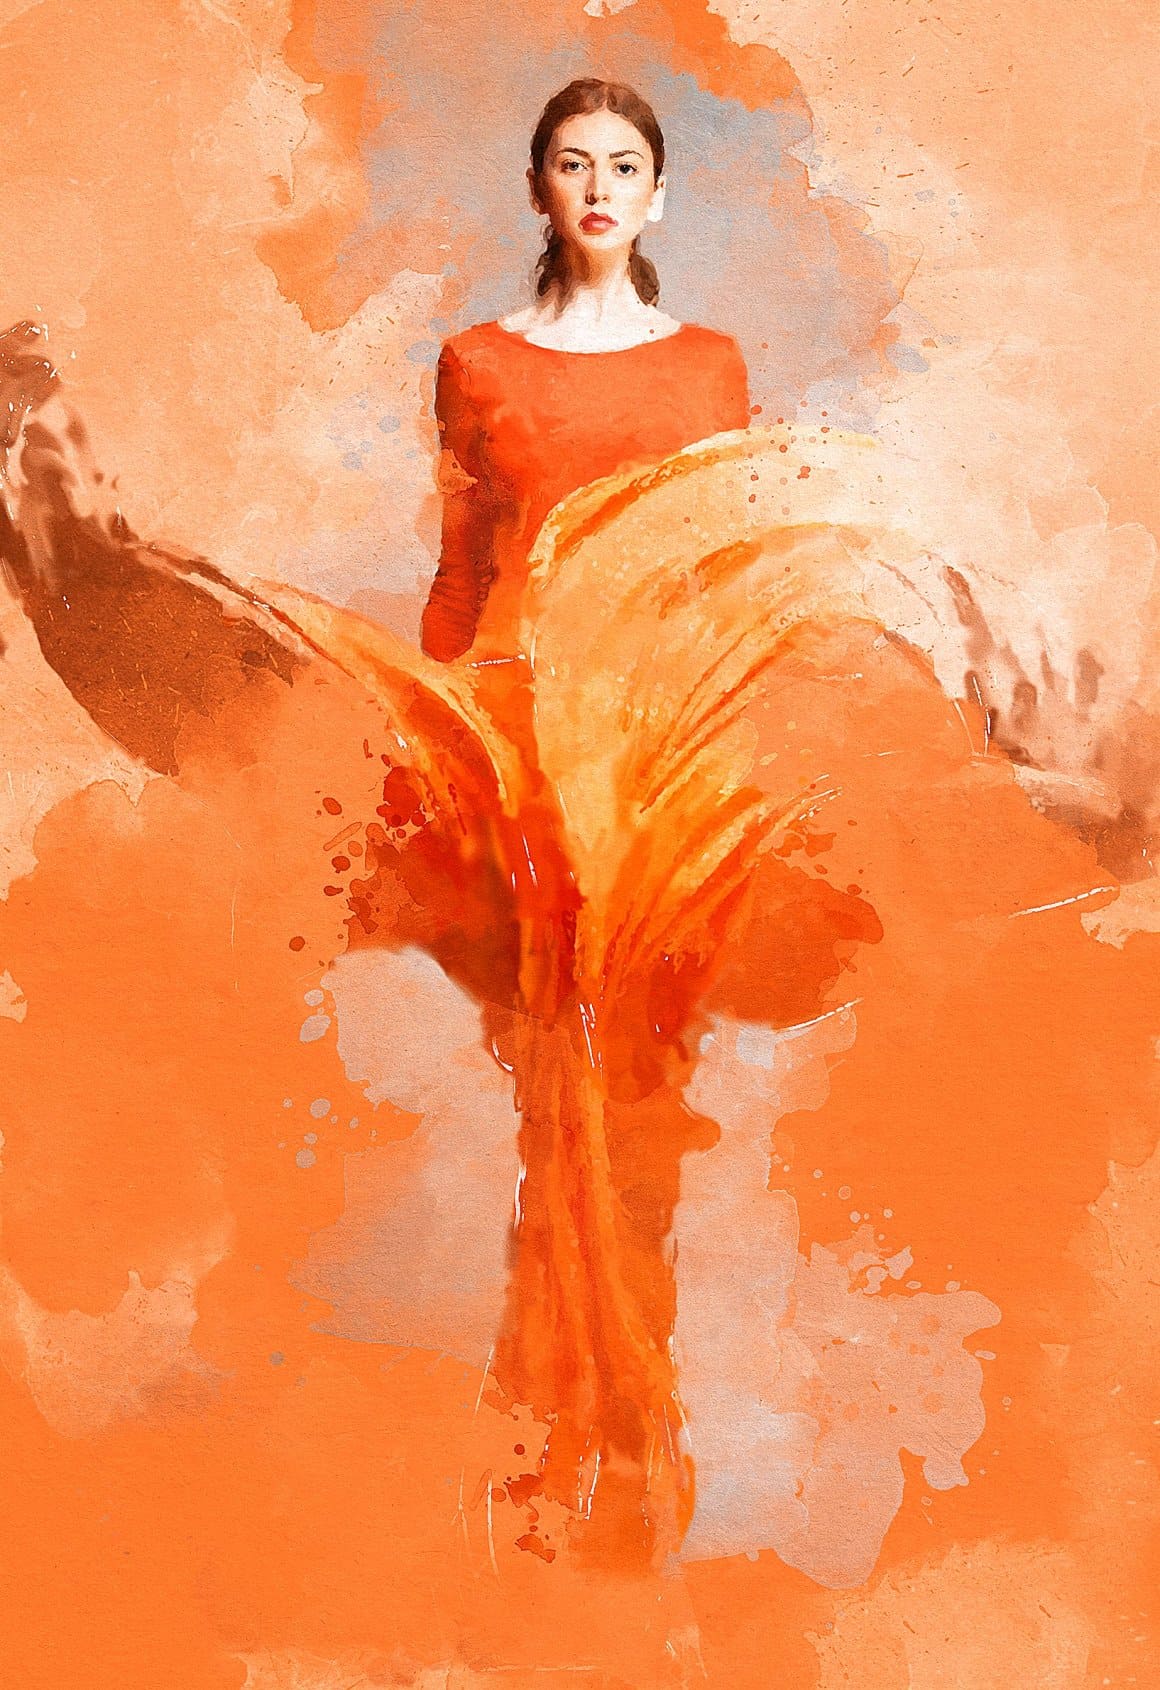 The portrait of a girl in an orange dress has been modified in Photoshop.